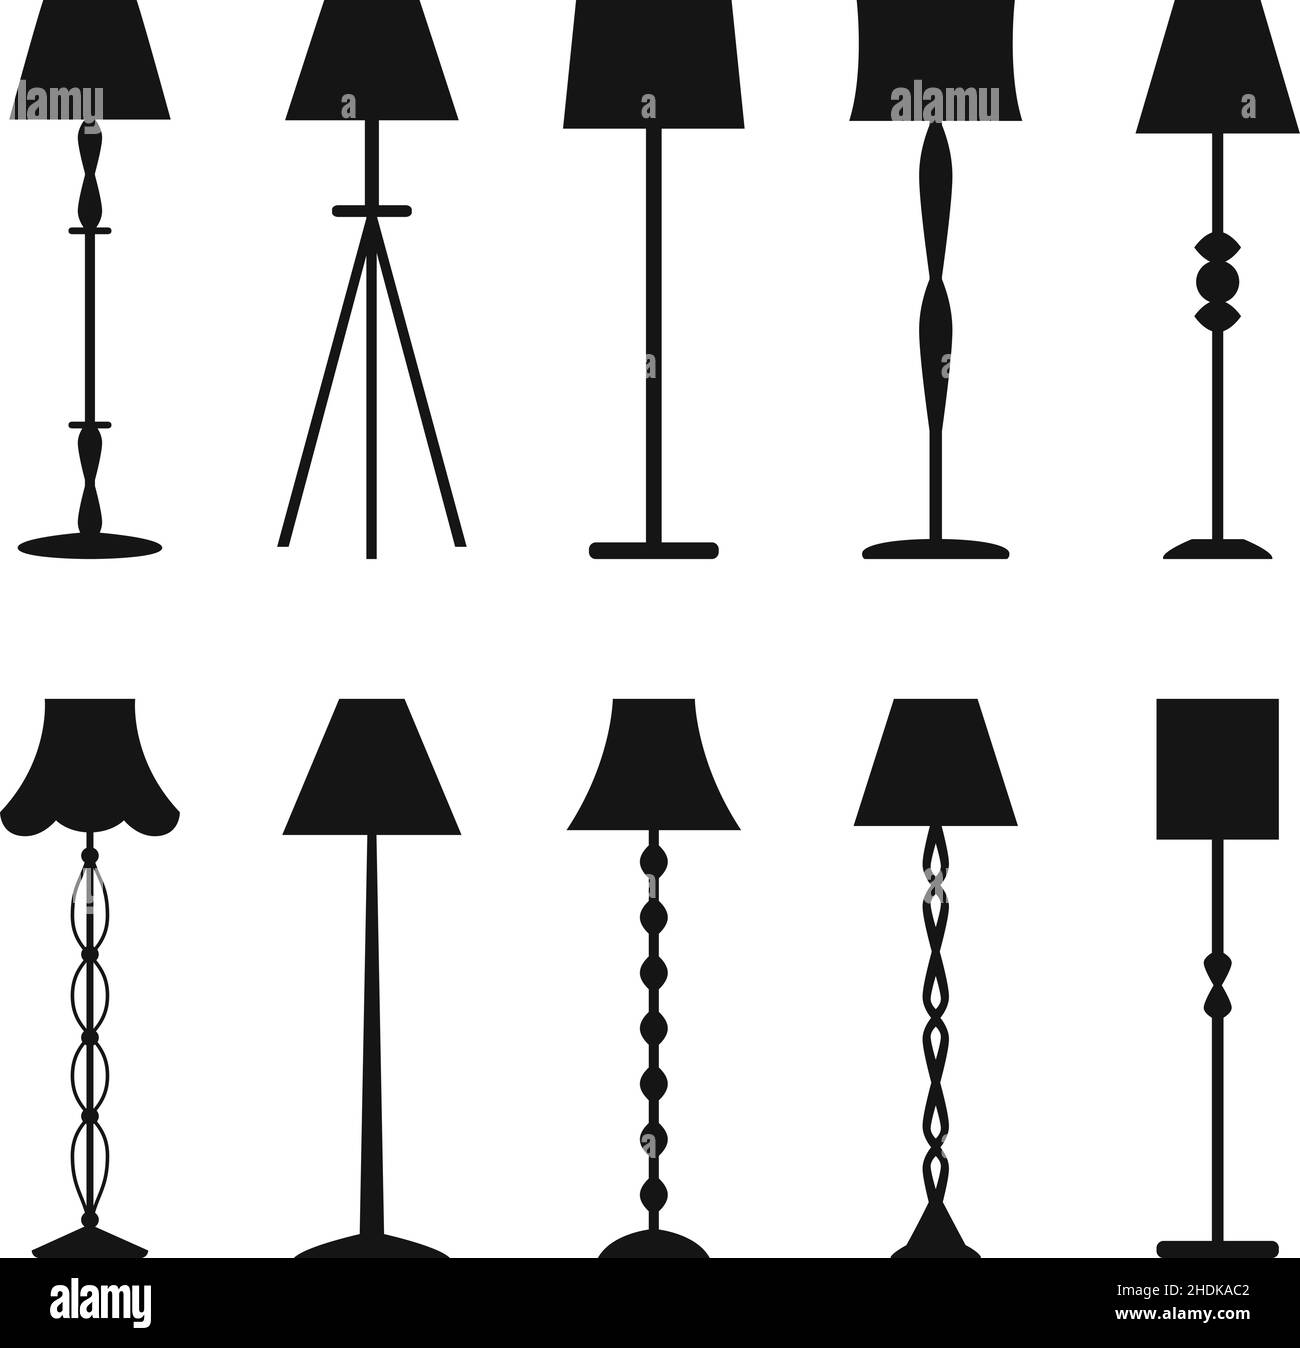 Set Of Floor Lamp Silhouettes Vector Illustration Stock Vector Image